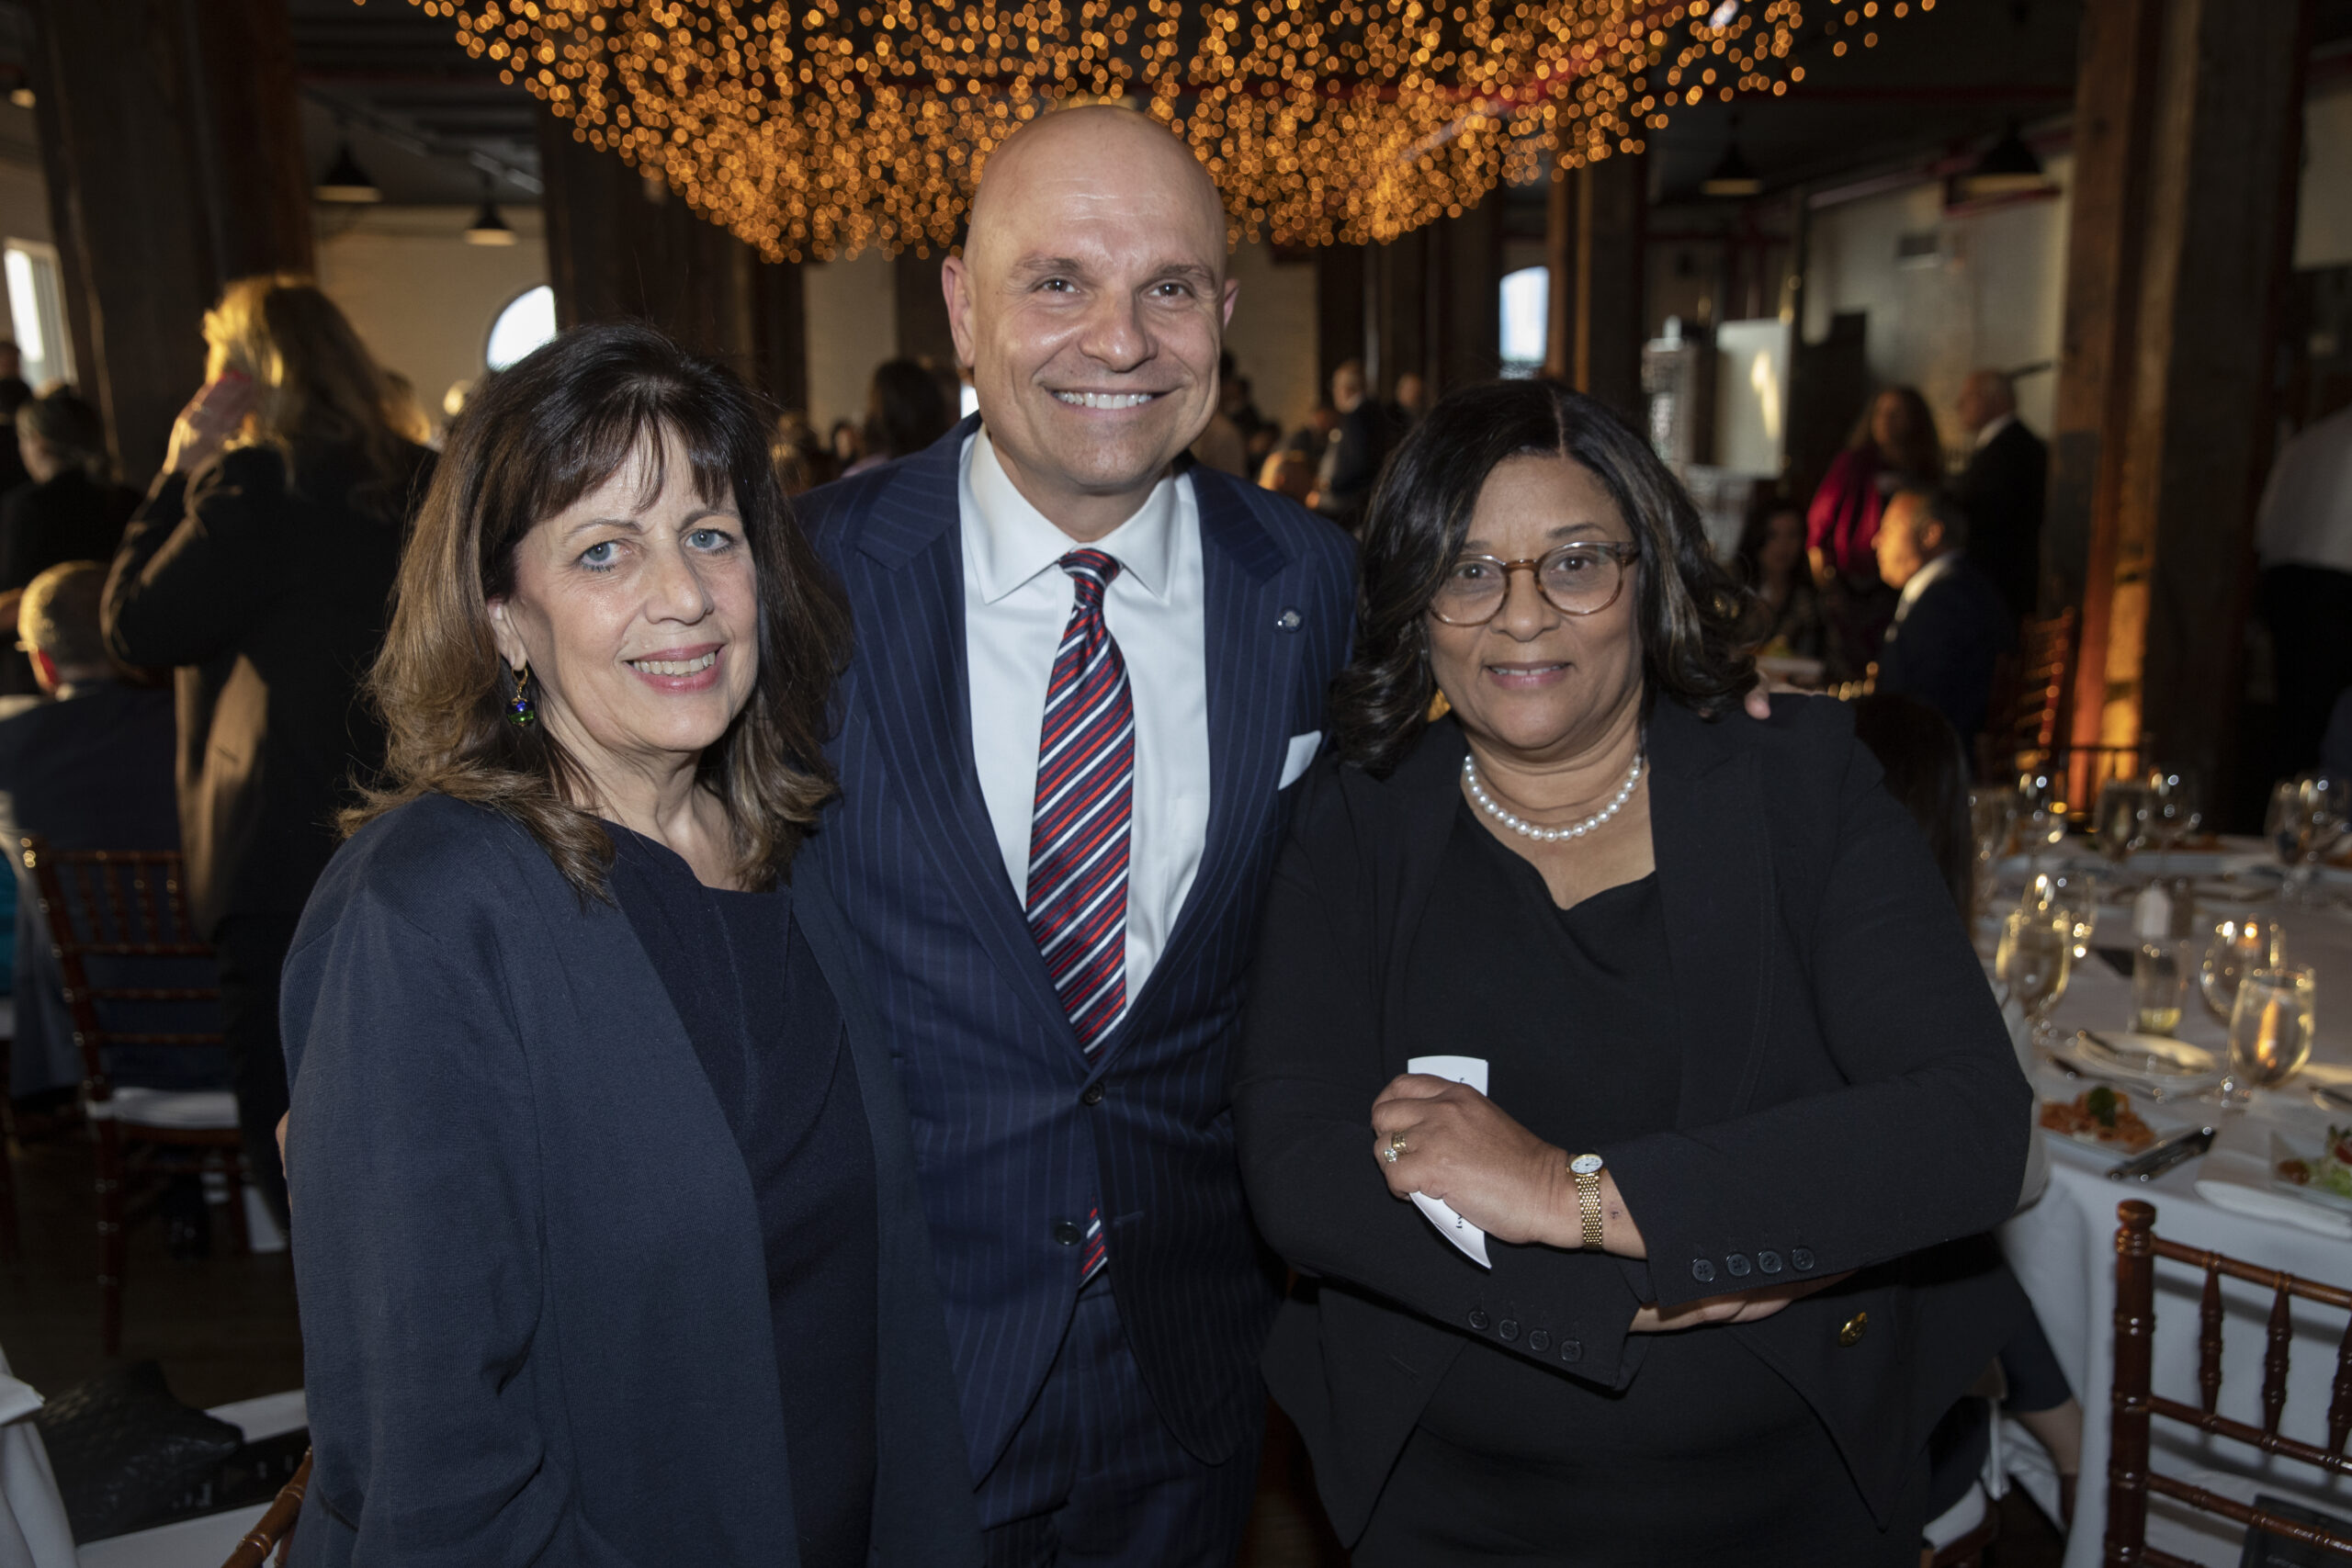 Justice Cheryl Chambers, associate justice of the Appellate Division, Second Department (right) — pictured here with Hon. Deborah Kaplan, Arthur Aidala — has been appointed as the new president of the New York Bar Foundation, the philanthropic arm of the New York State Bar Association, effective June 1. Eagle photo by John McCarten